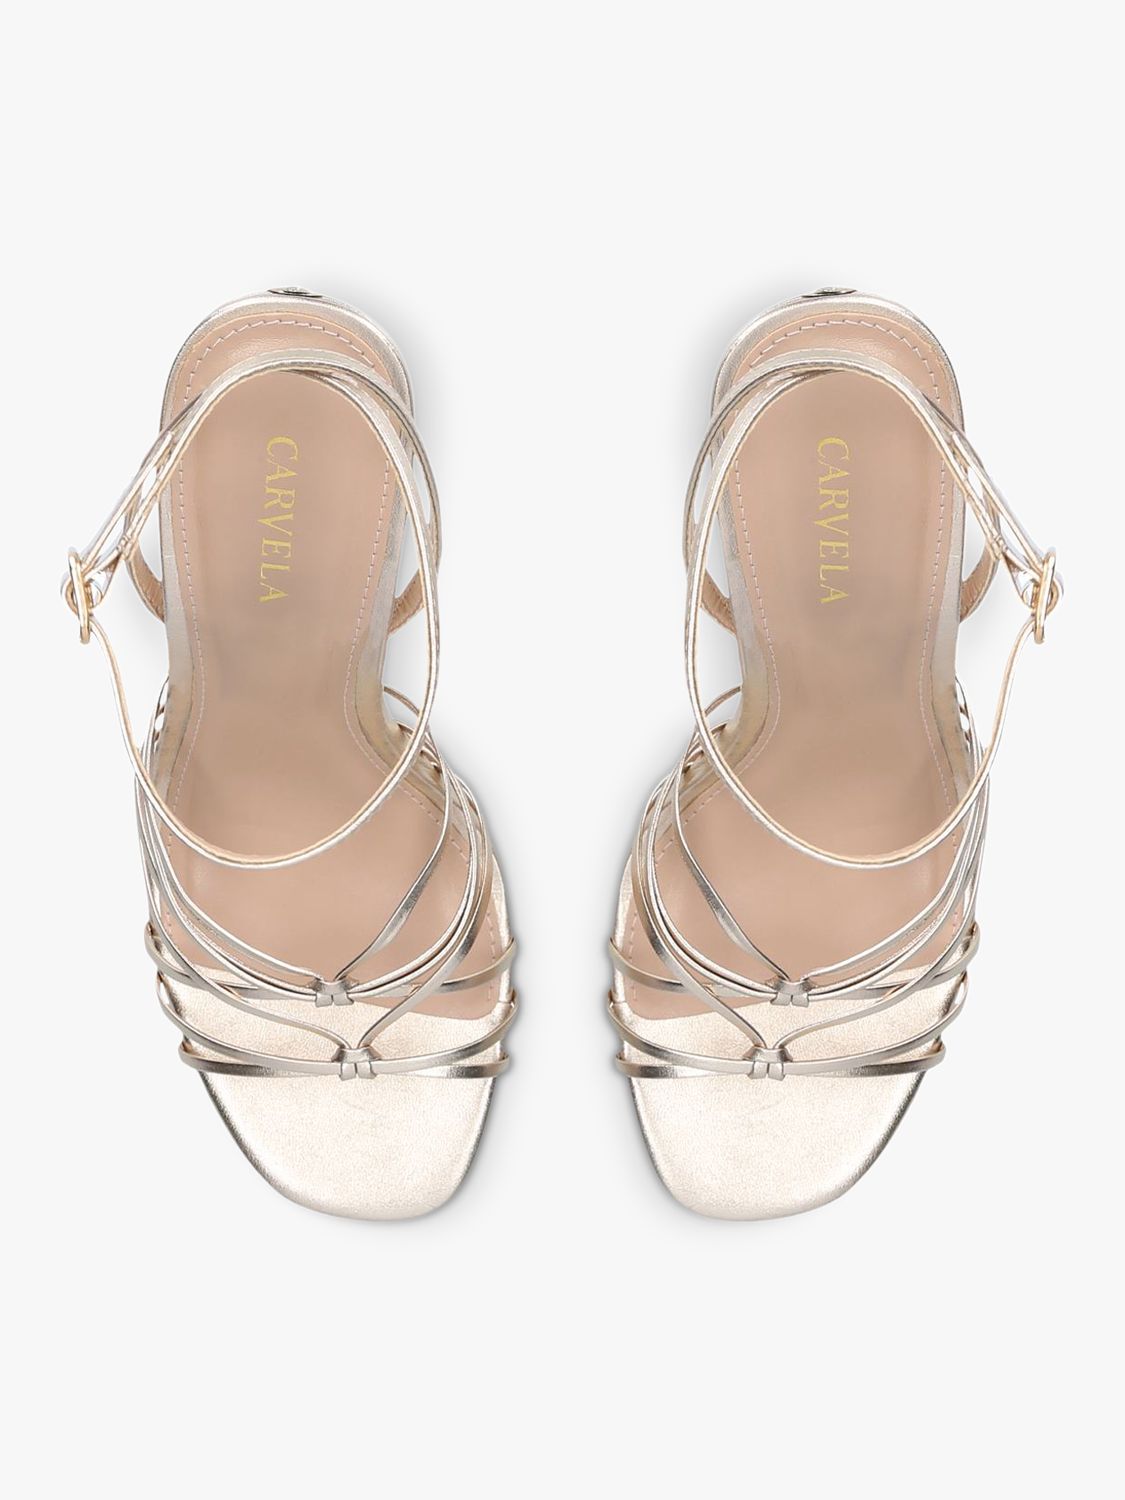 Carvela Glowing Leather Fluted Heel Strappy Sandals, Gold